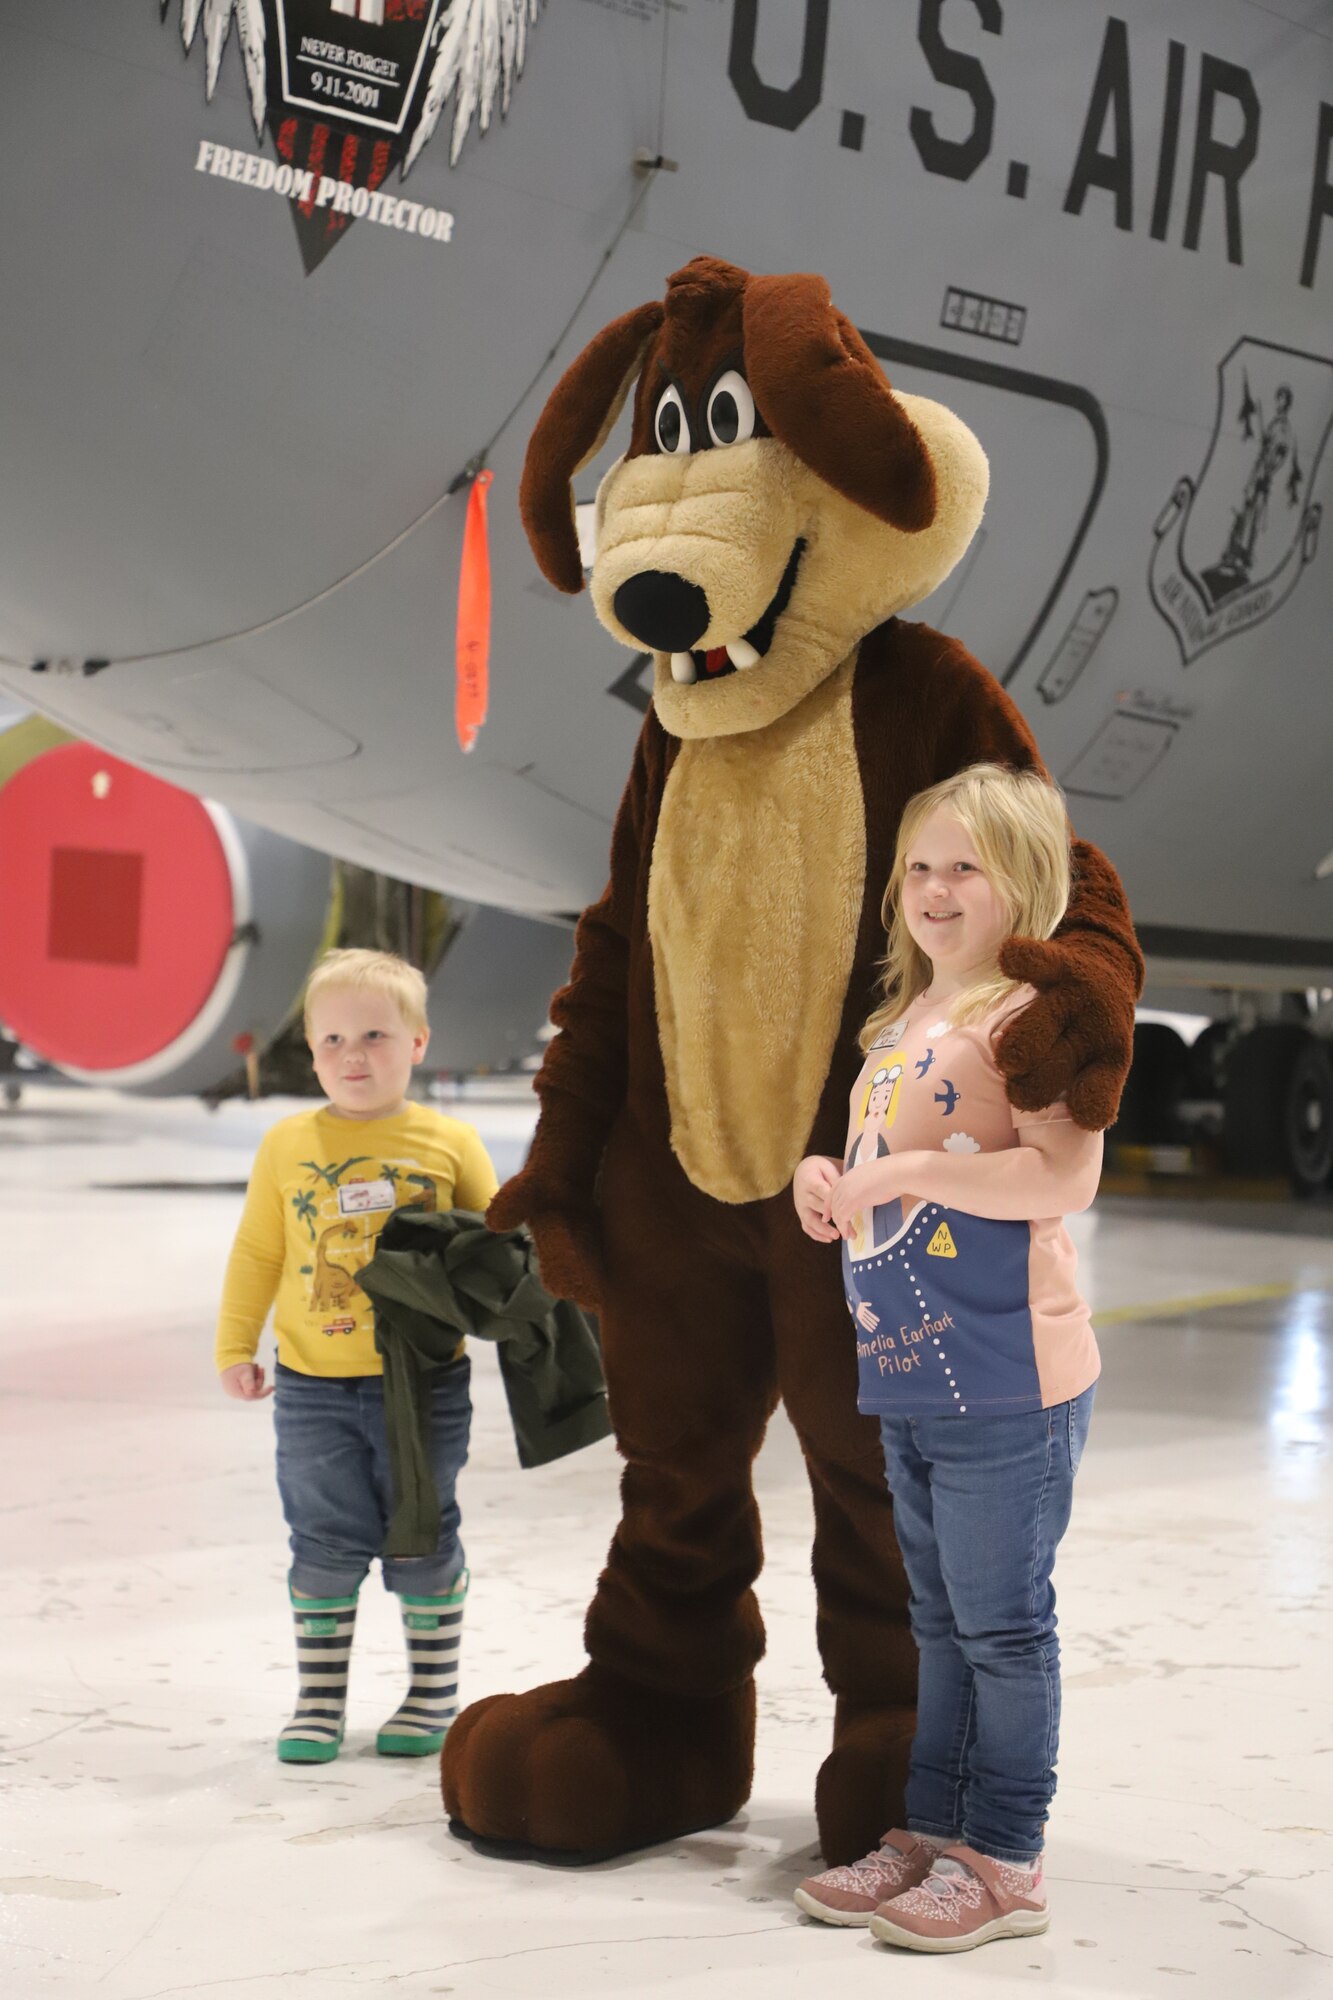 Tinley Benyshek, Pilot for the Day, and her brother, Trip, pose with Wylie at the 190th Air Refueling Wing in Topeka, KS, October 24, 2022. Tinley is the first Pilot for a Day participant at the 190th ARW.